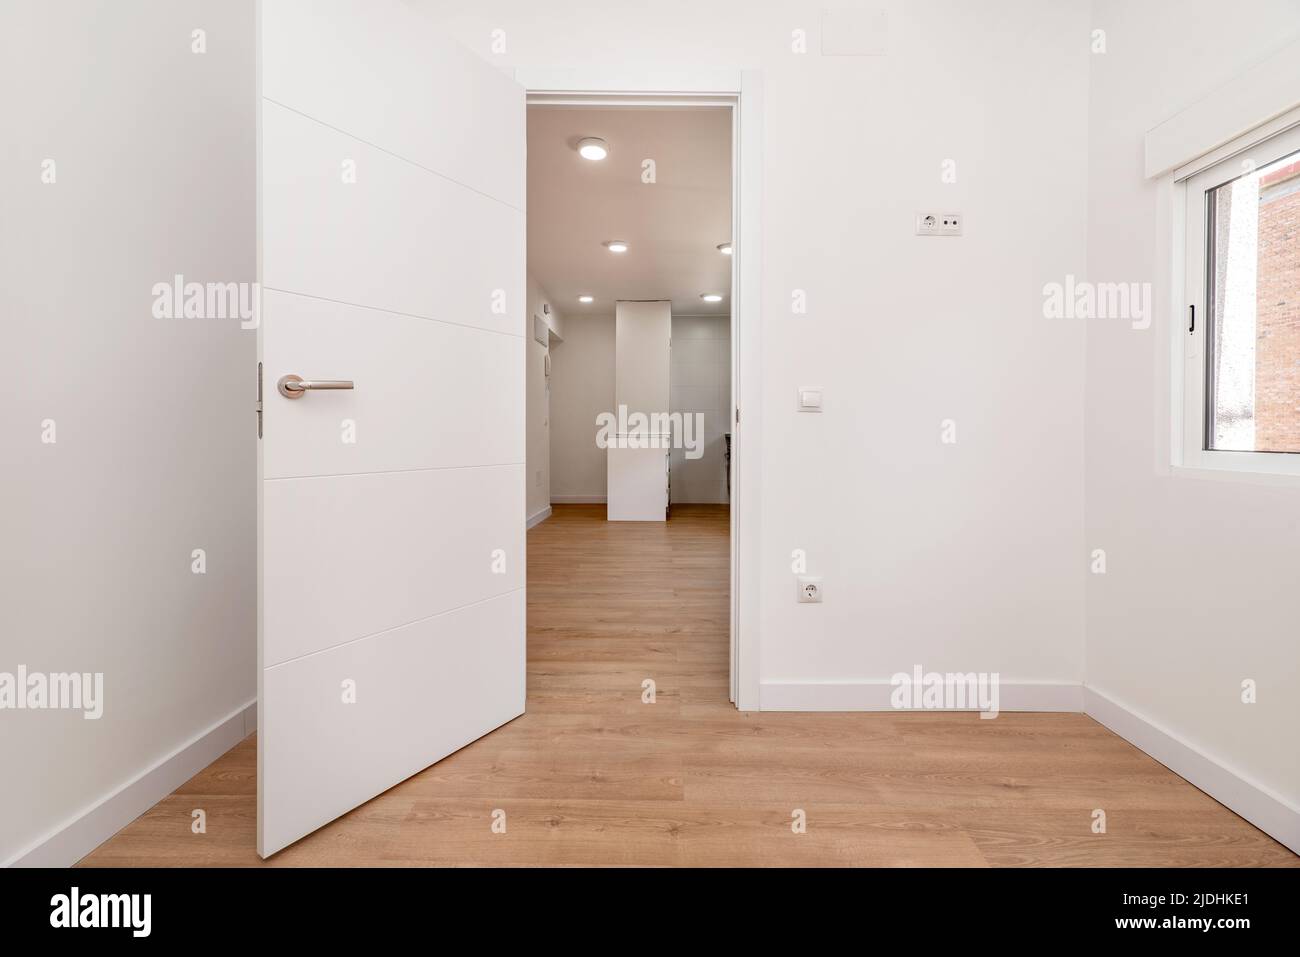 Empty room with oak parquet floor, white painted walls, access to another room and white aluminum windows Stock Photo